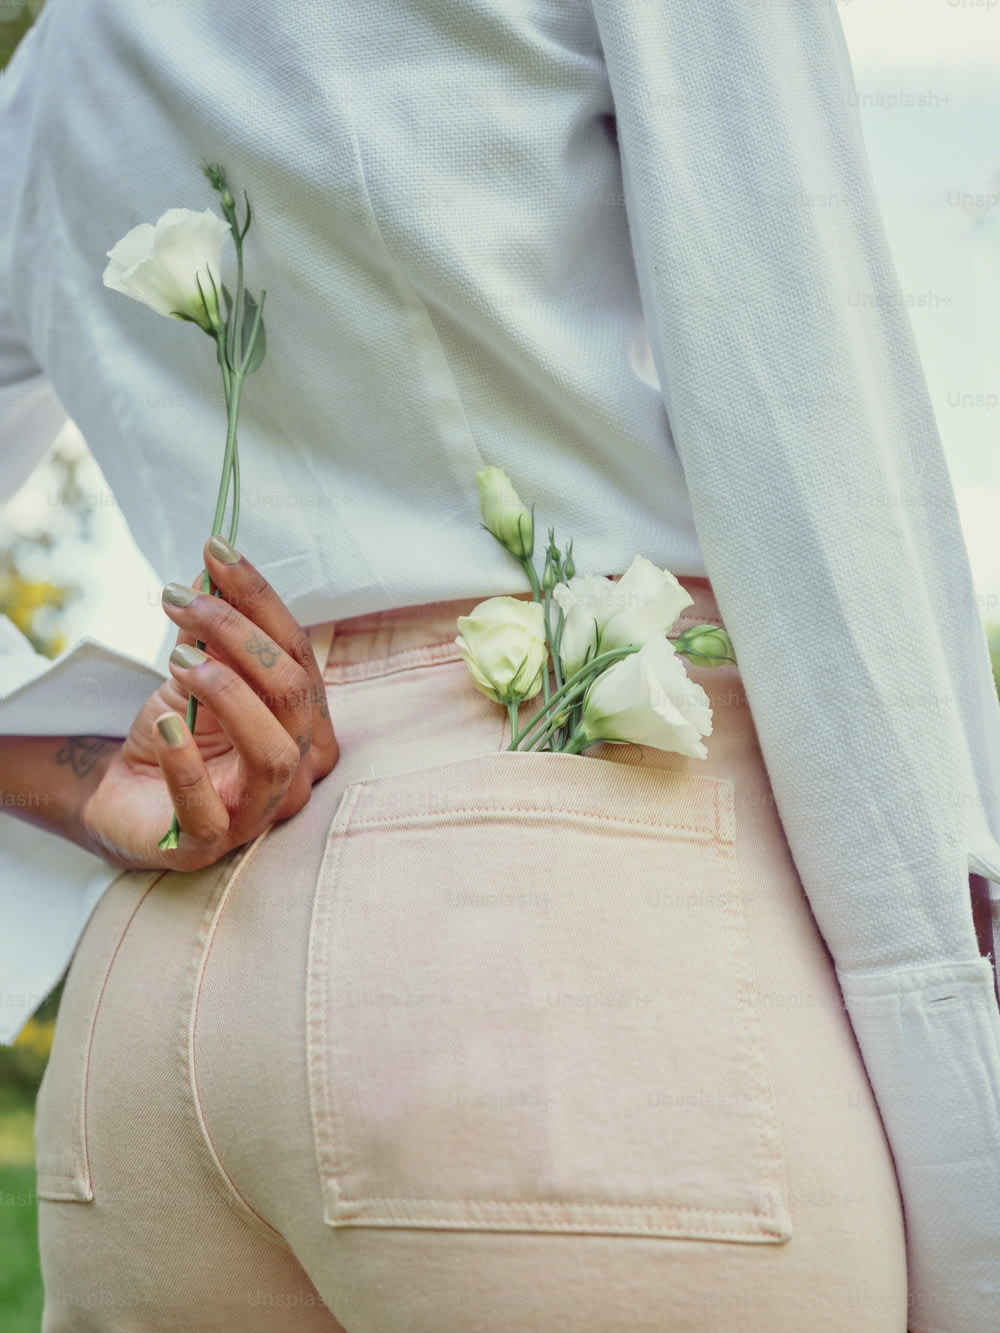 a woman wearing a white shirt and pink pants